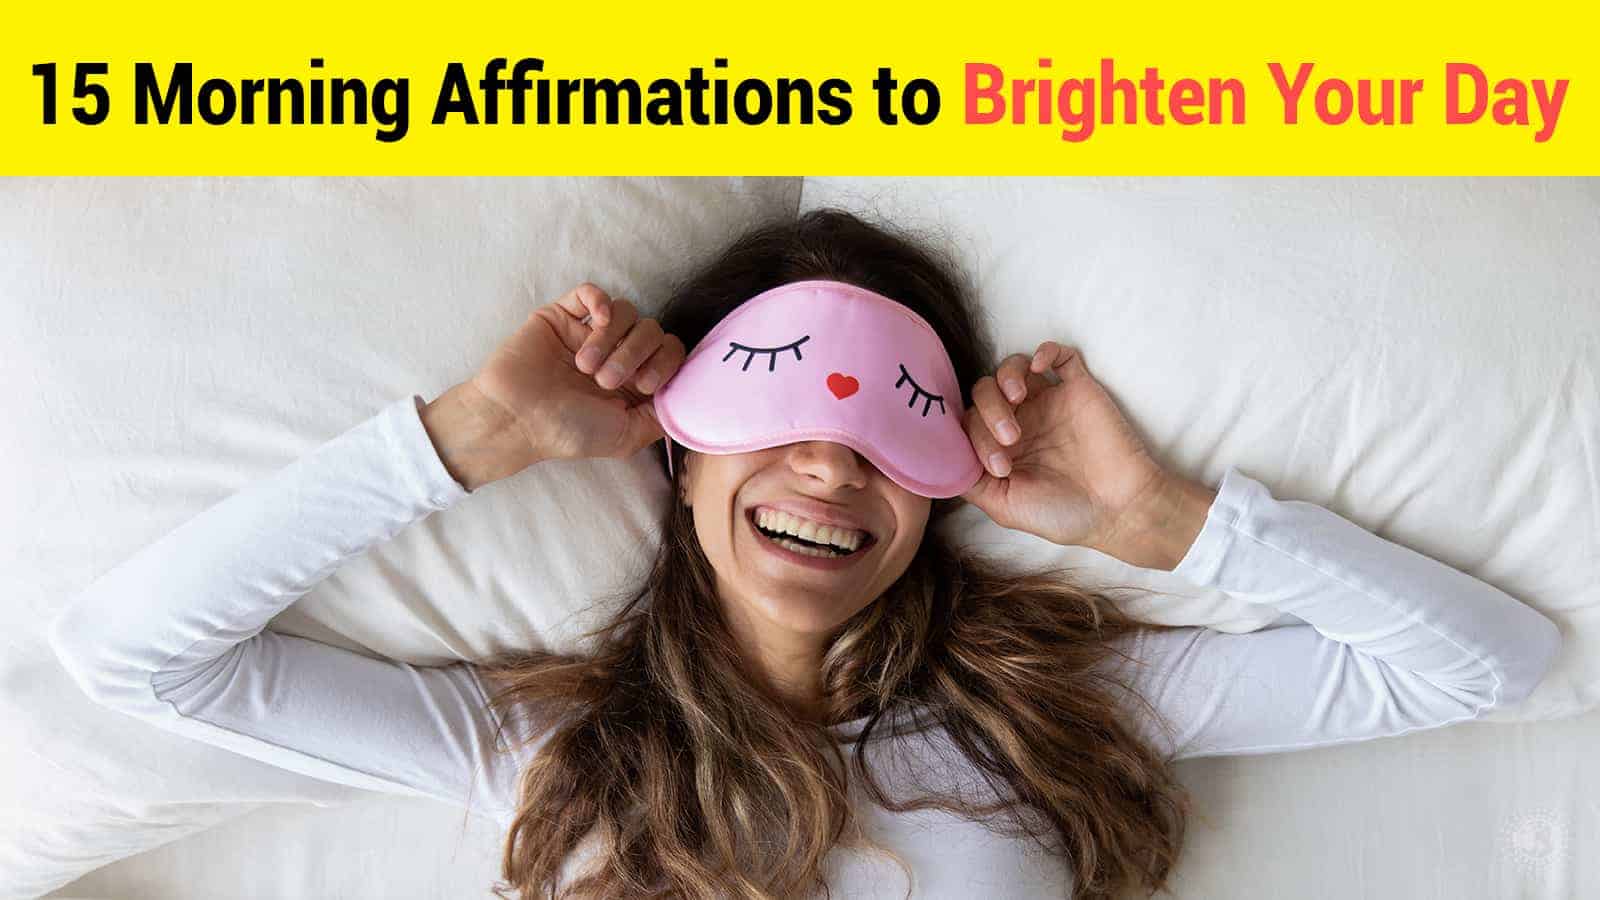 15 Morning Affirmations to Brighten Your Day